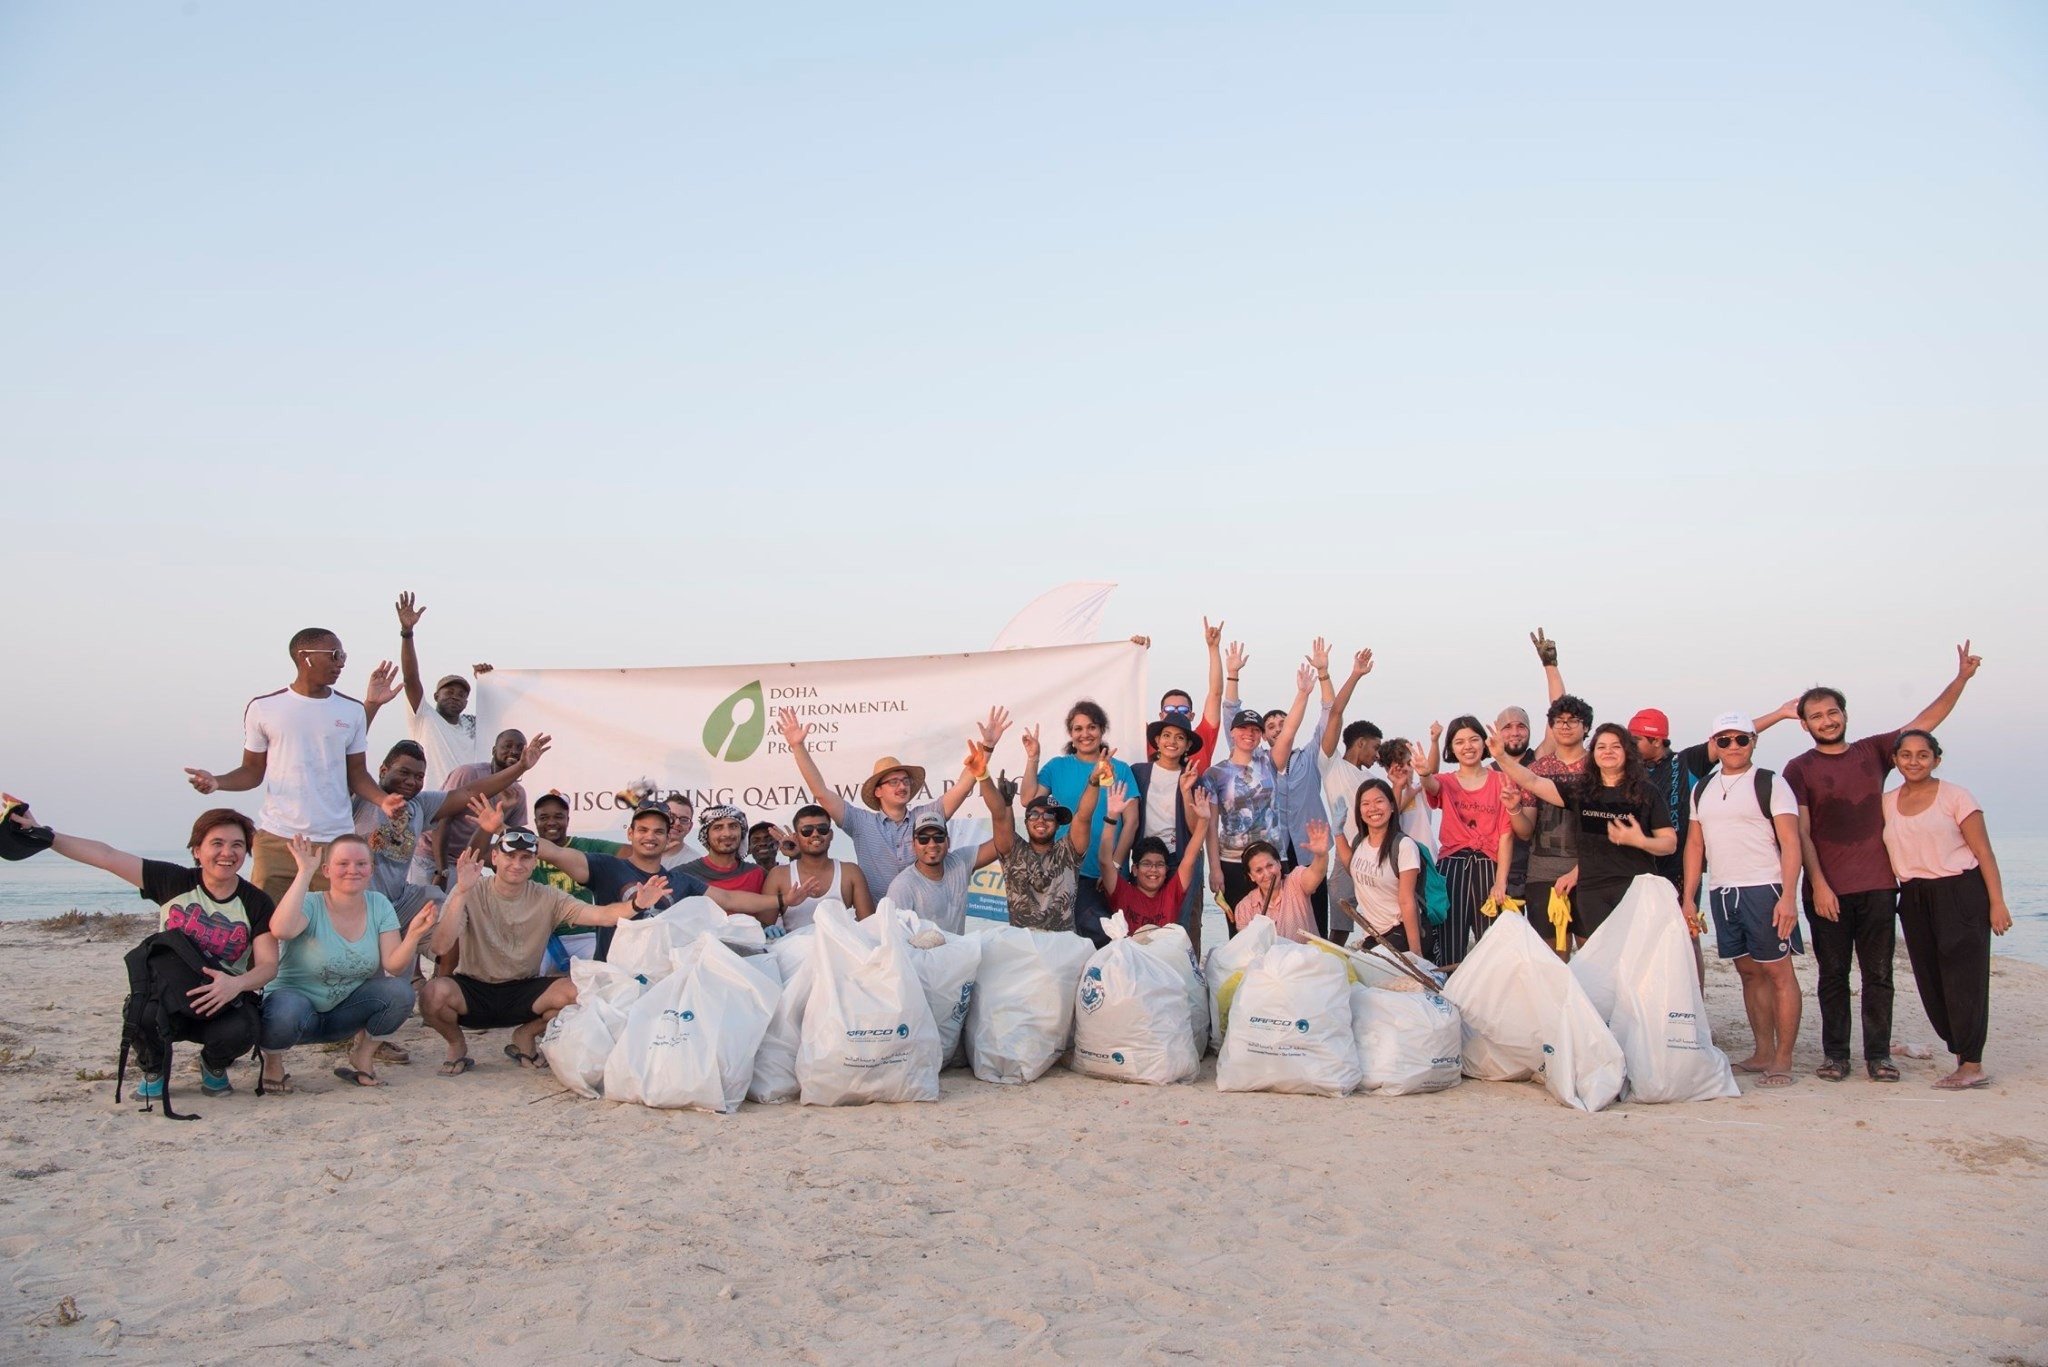 Collected litter on Qatar beaches